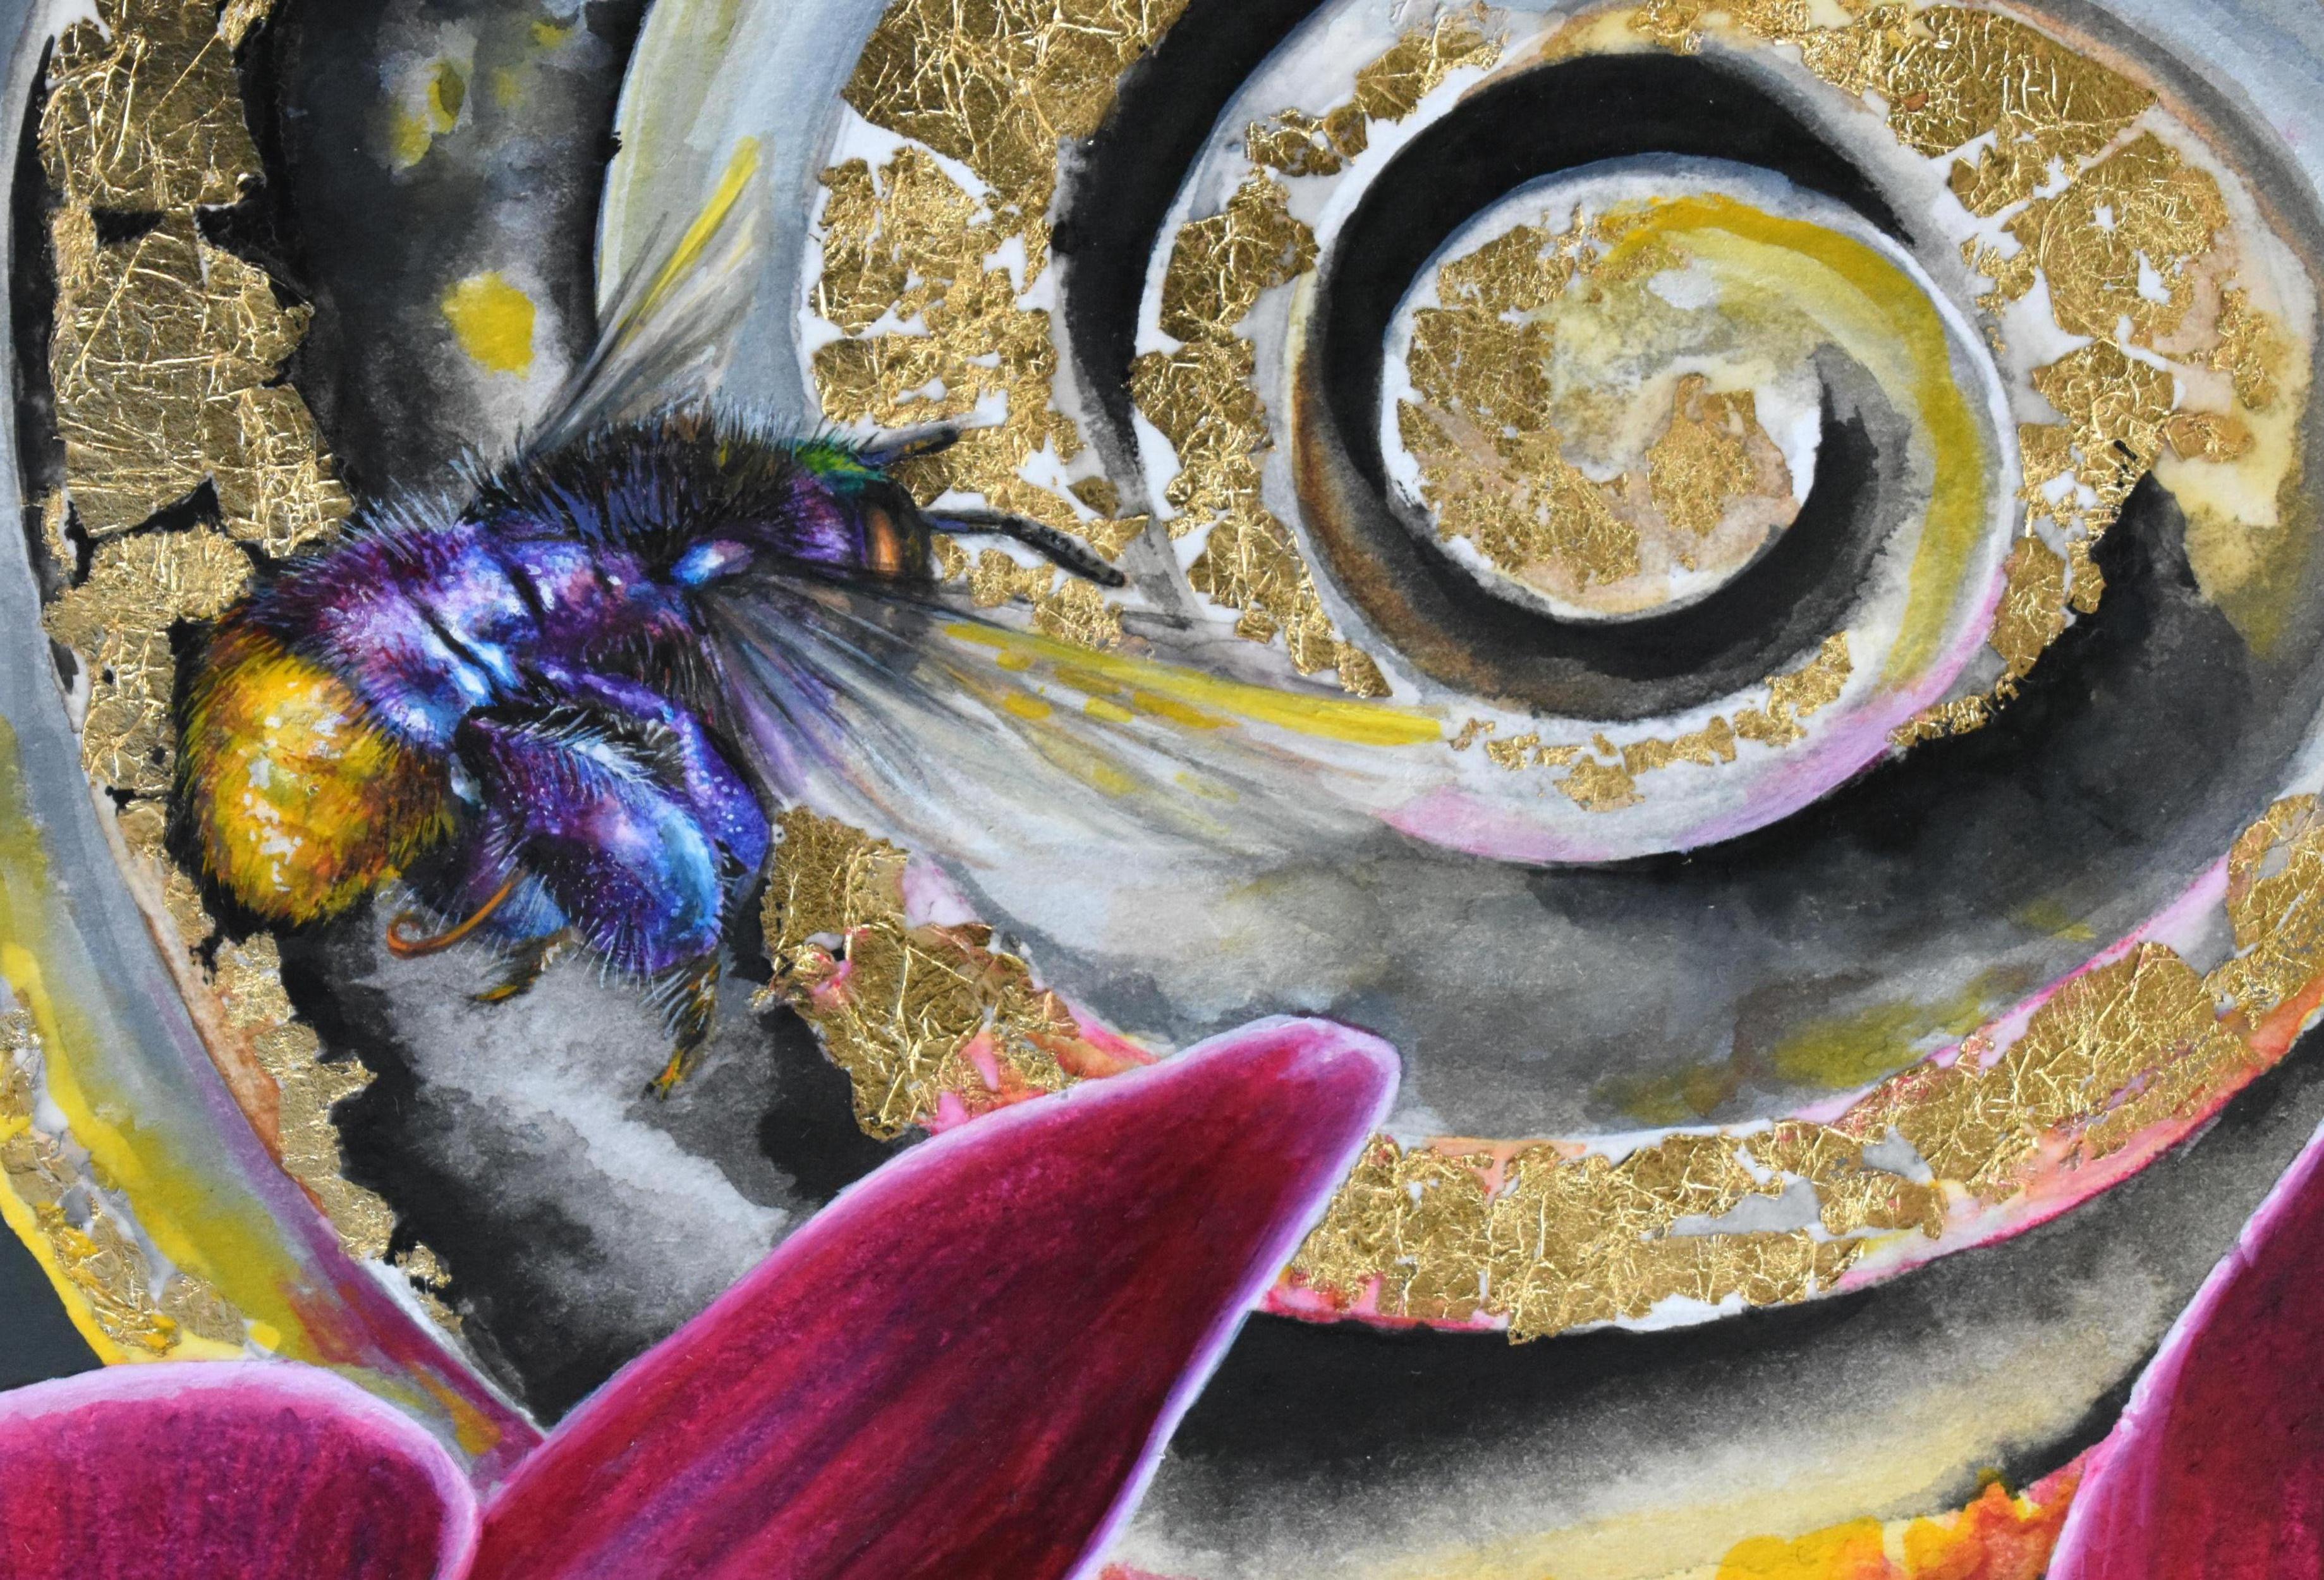 This botanical painting in watercolor, gouache, graphite and gold leaf on Bristol paper depicts bright pint orchids and a bumble bee perched on a golden swirl shape. Fox's excellent use of material allow her to blend multiple images together,